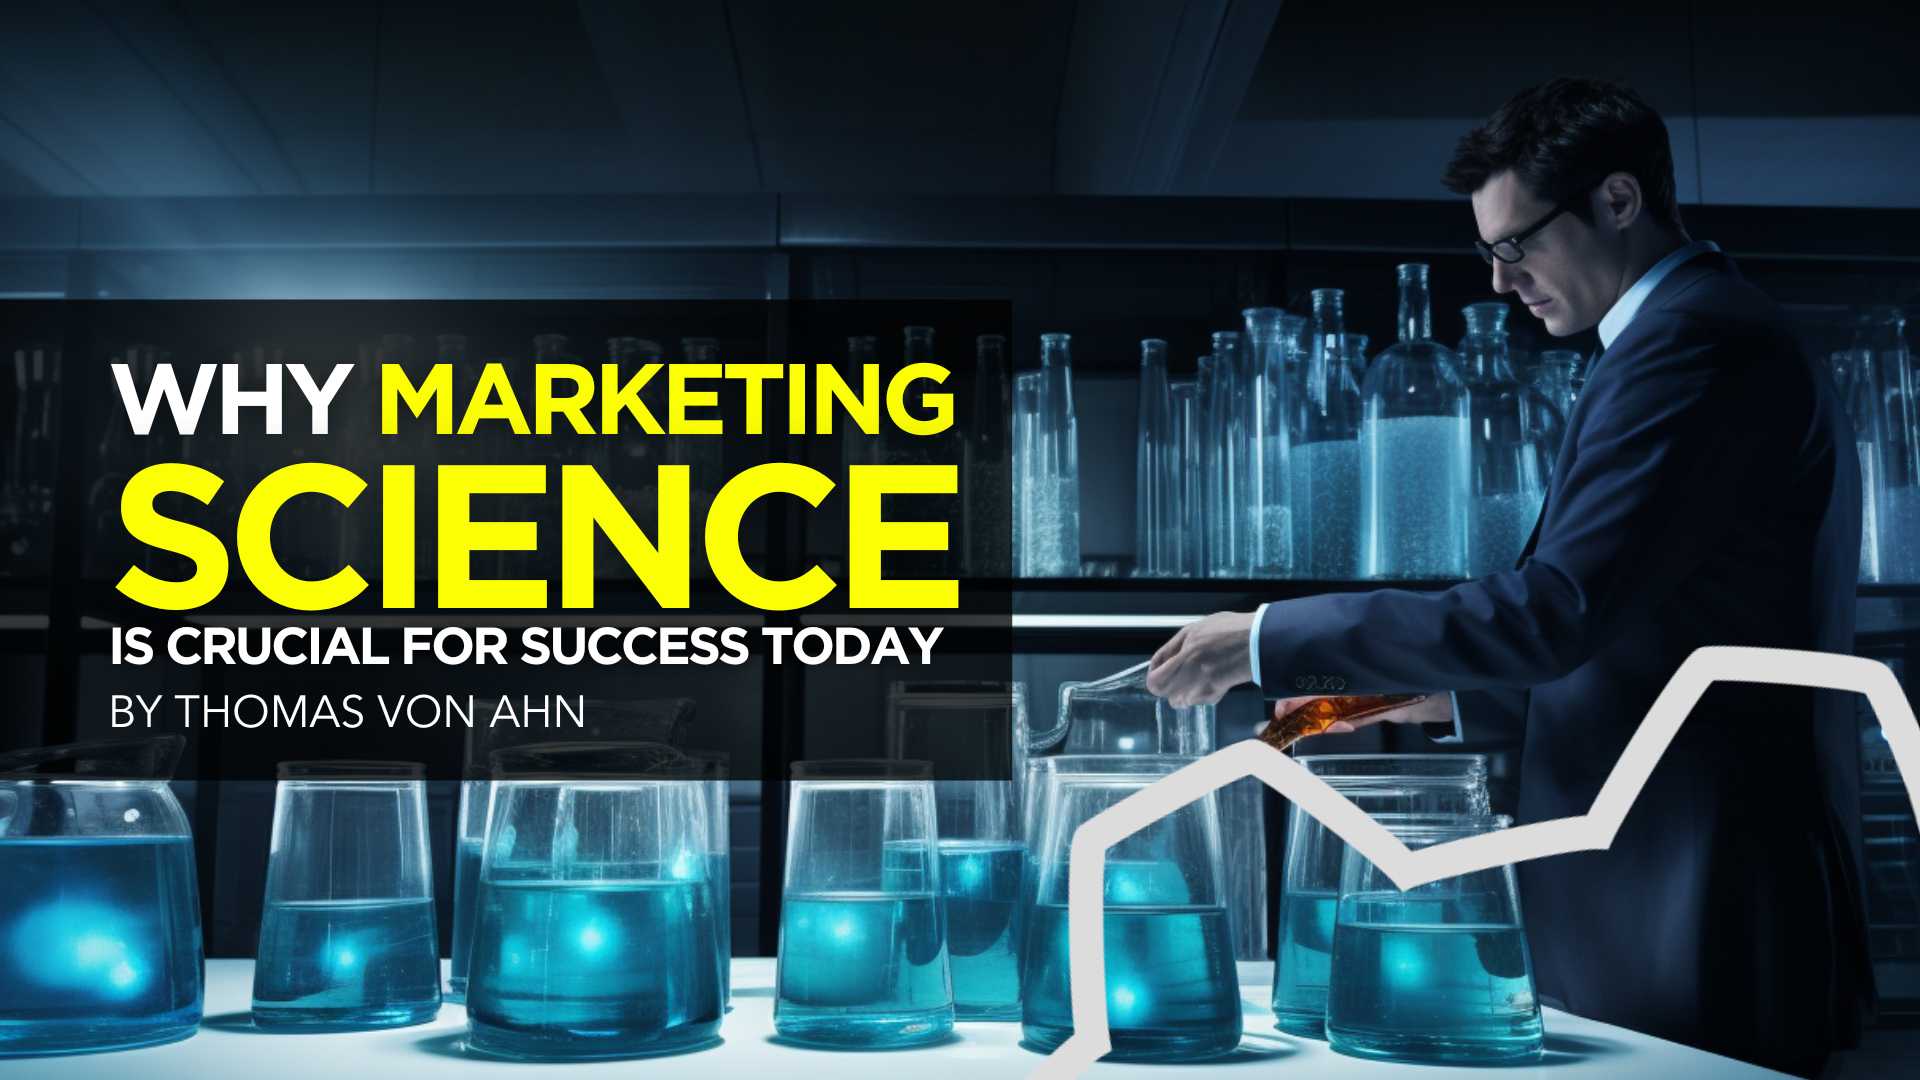 Why Marketing Science Is Crucial for Success Today